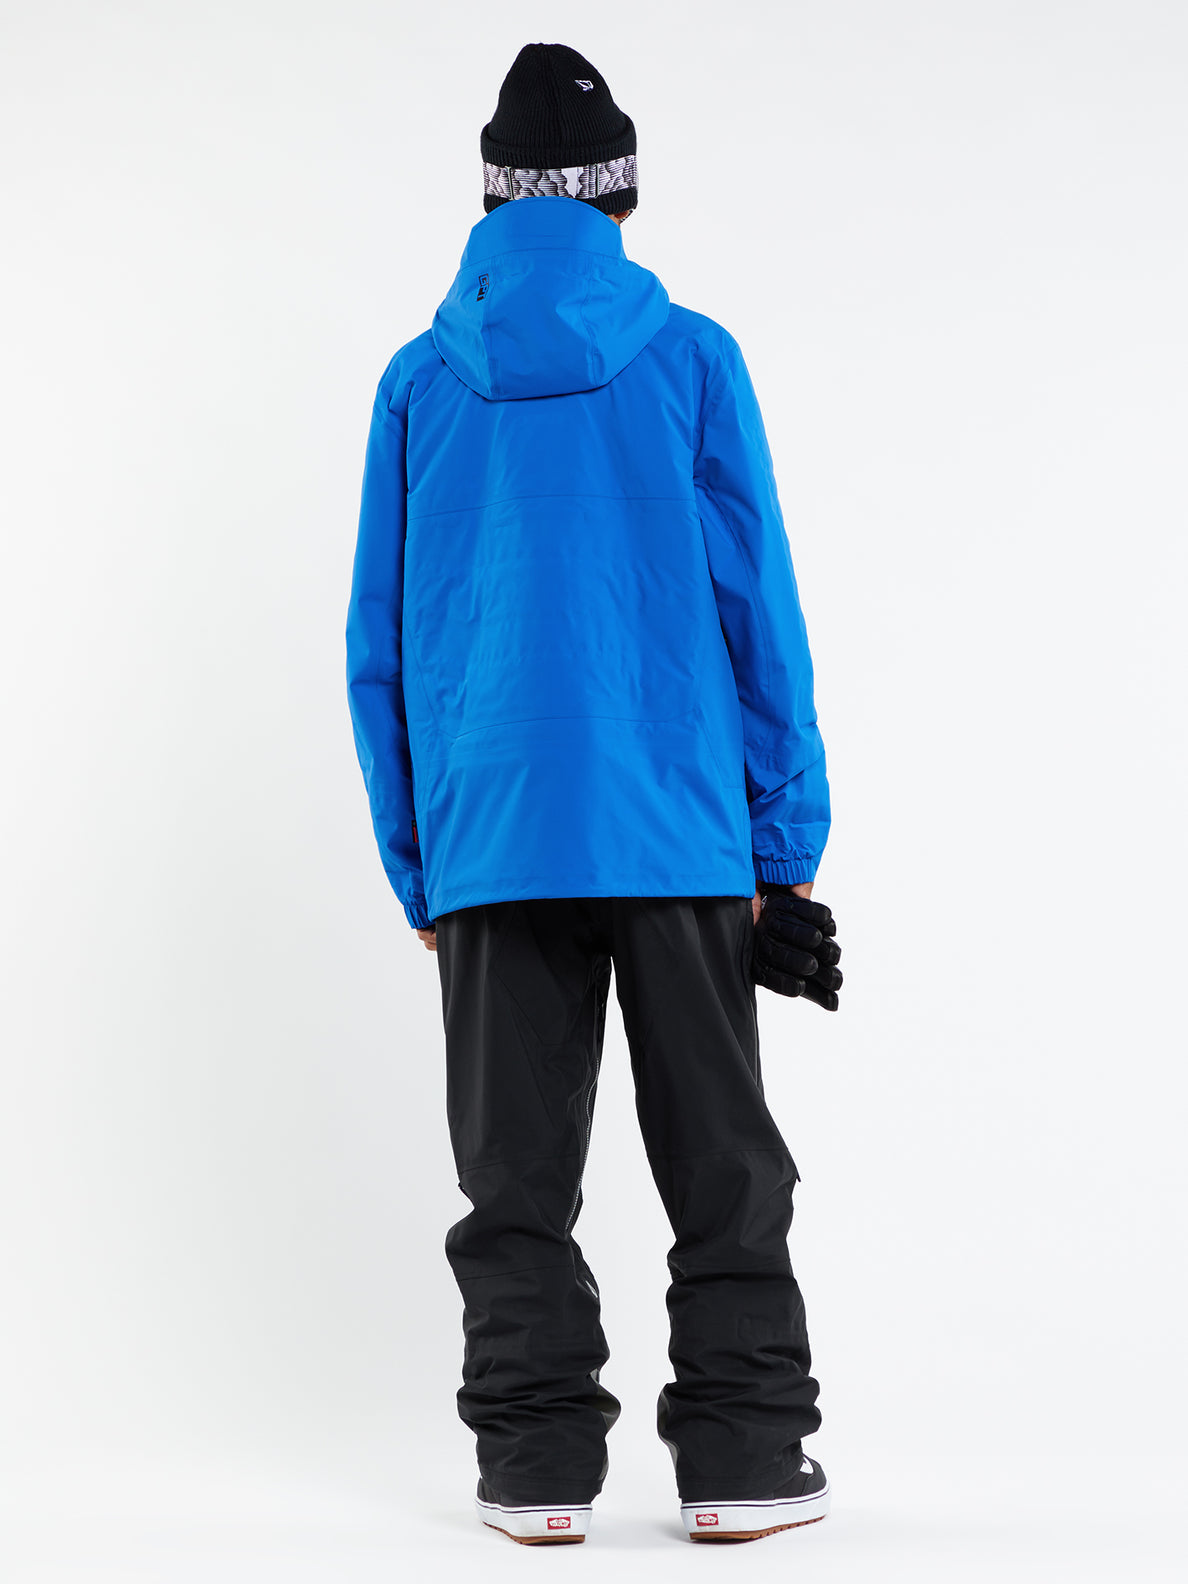 Tds Infrared Gore-Tex Jacket - ELECTRIC BLUE